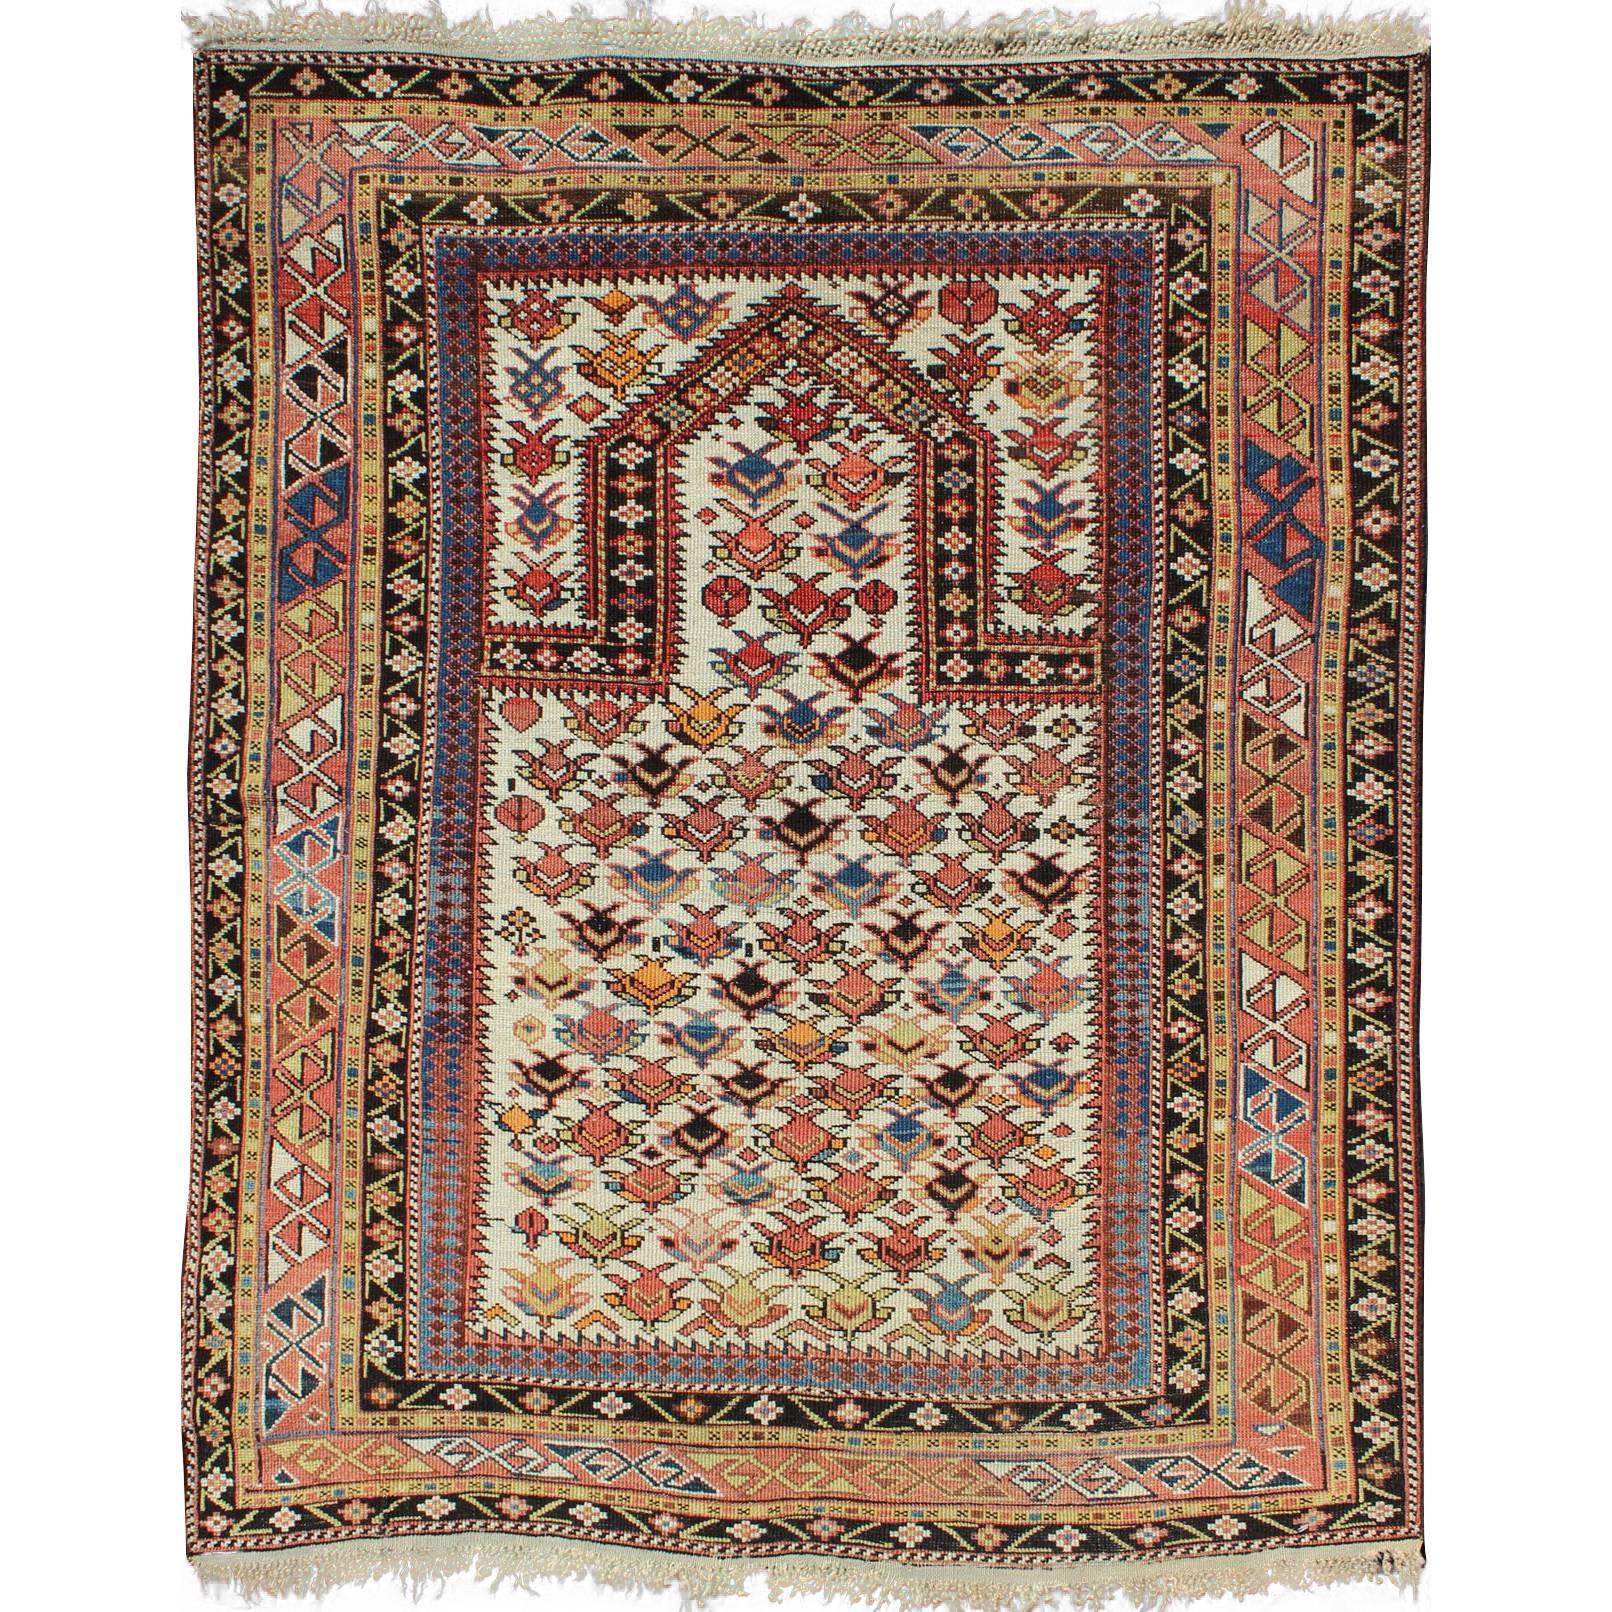 Antique Caucasian Shirvan Rug in Ivory Background, Rust, Yellow, and Dark Brown